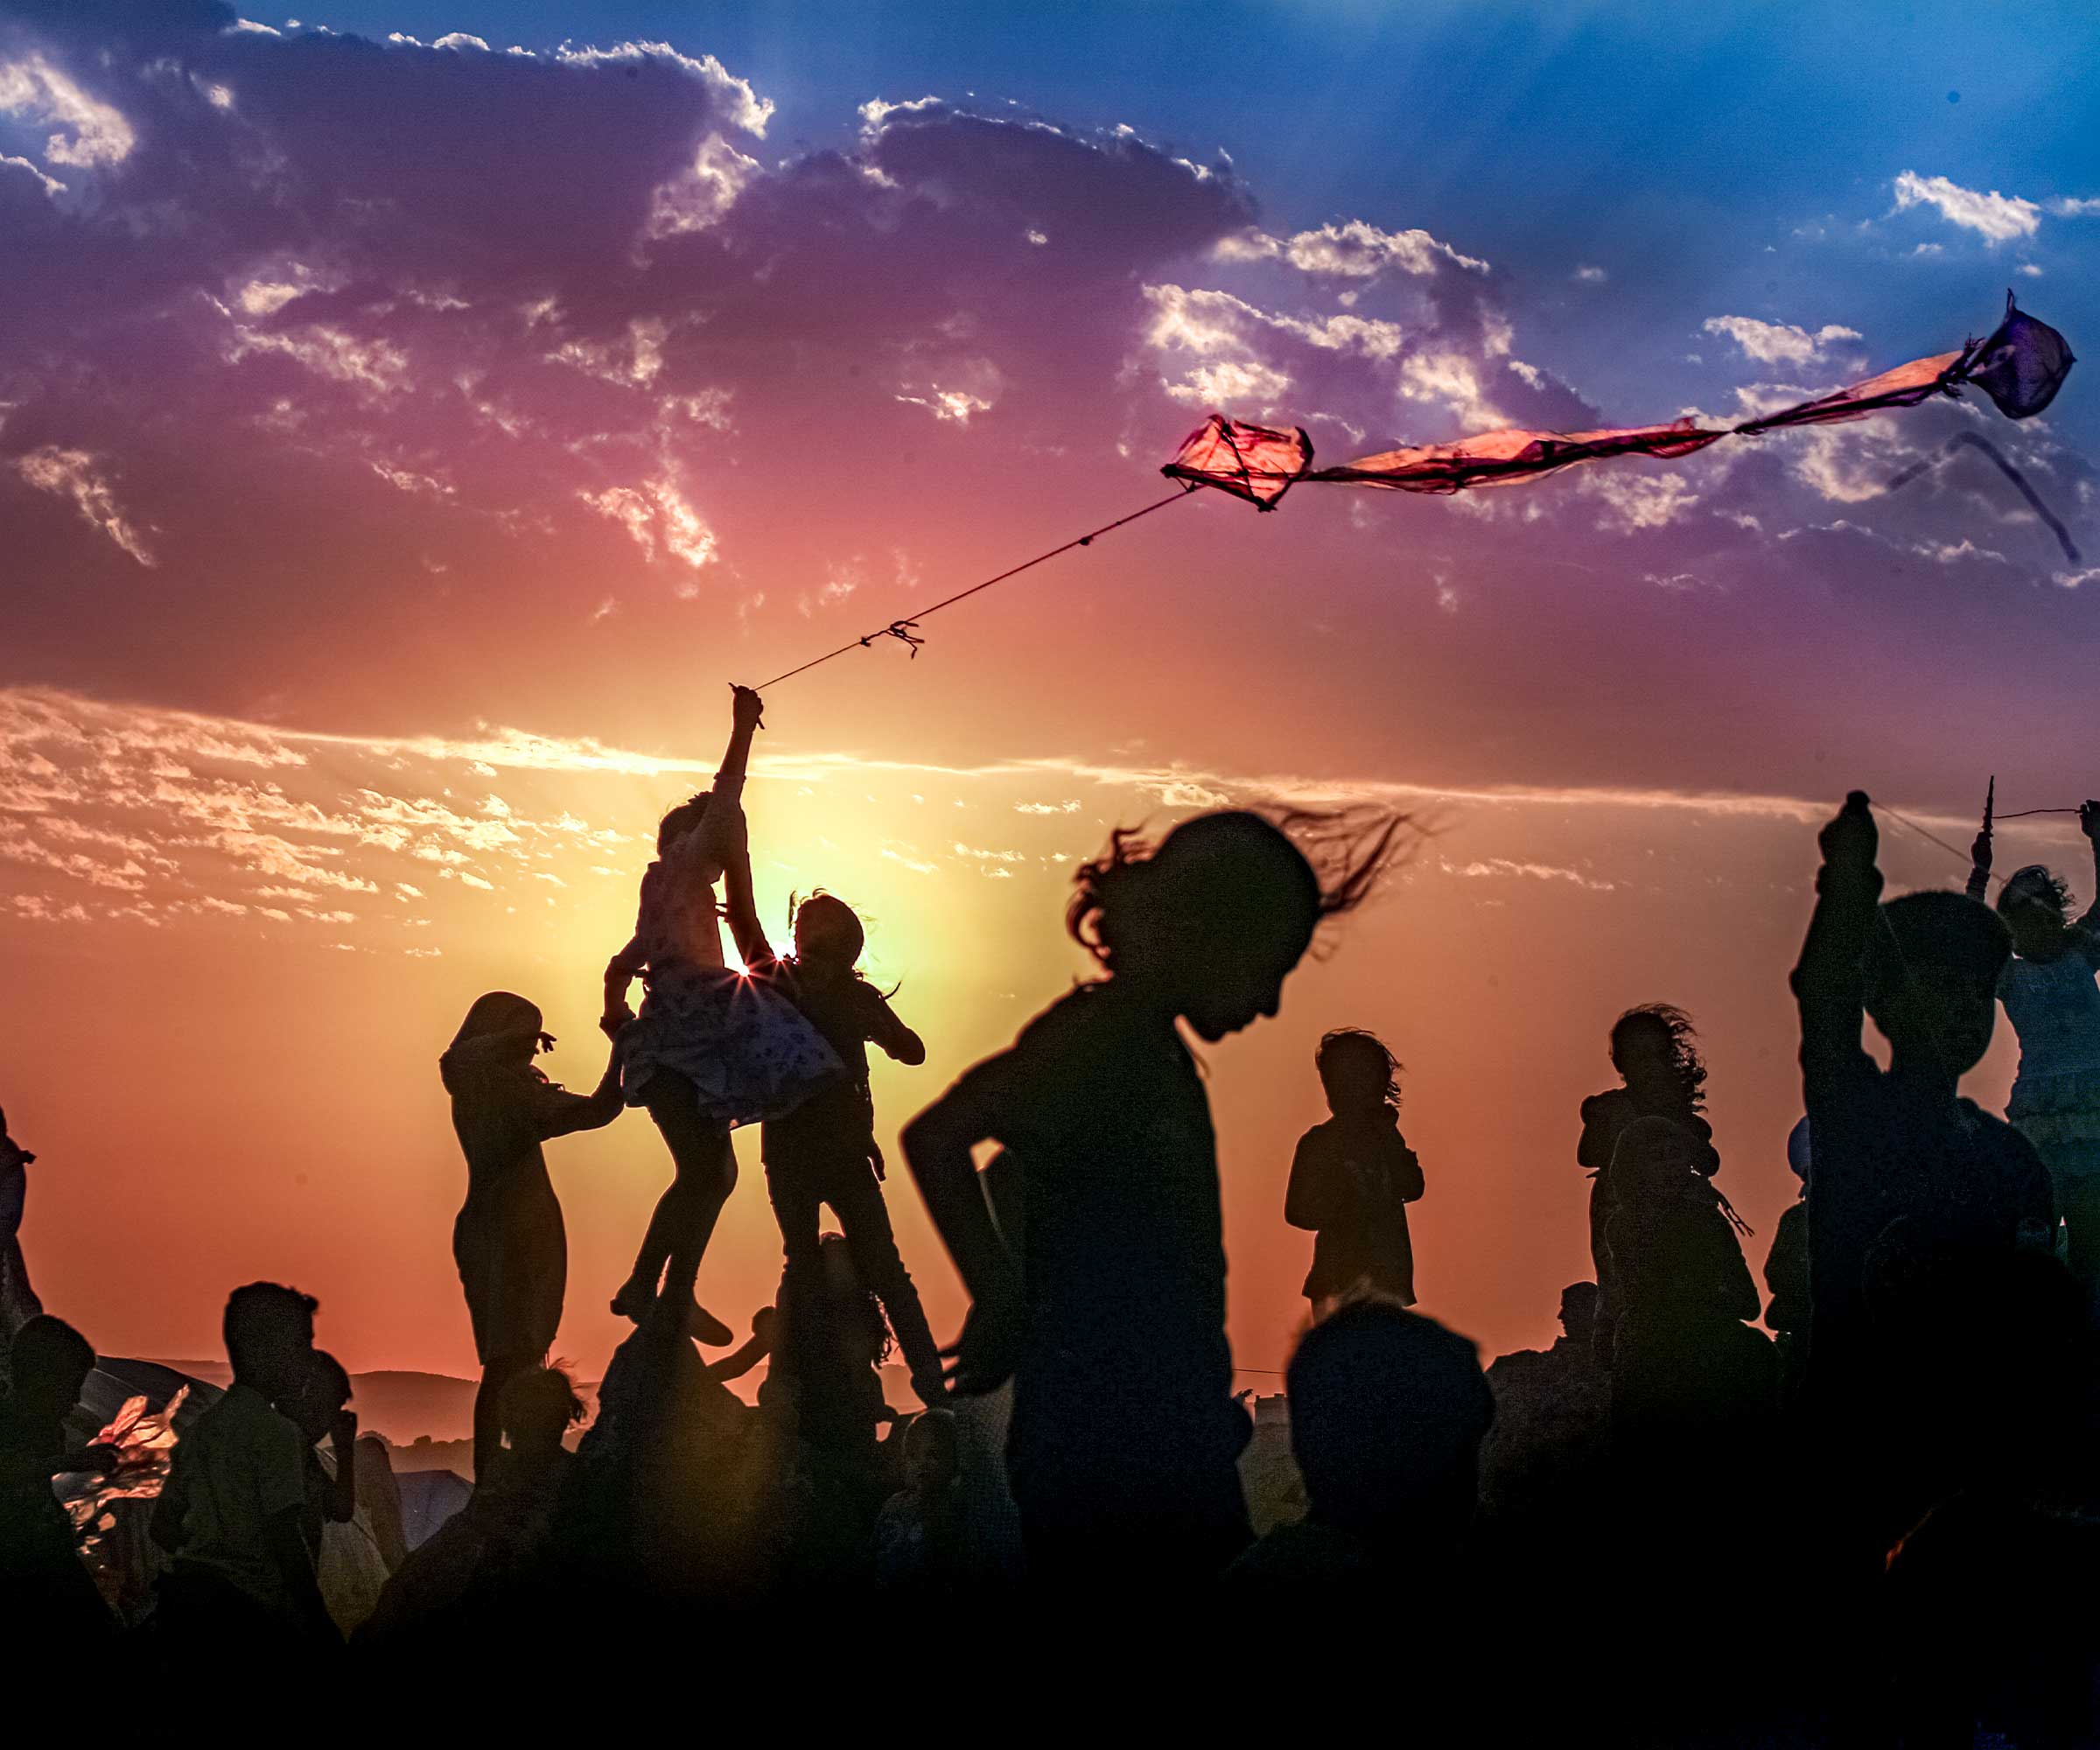 Syrian children fly kites at a refugee camp near the Turkish border. © Muhammed Said/Anadolu Agency/Getty Image